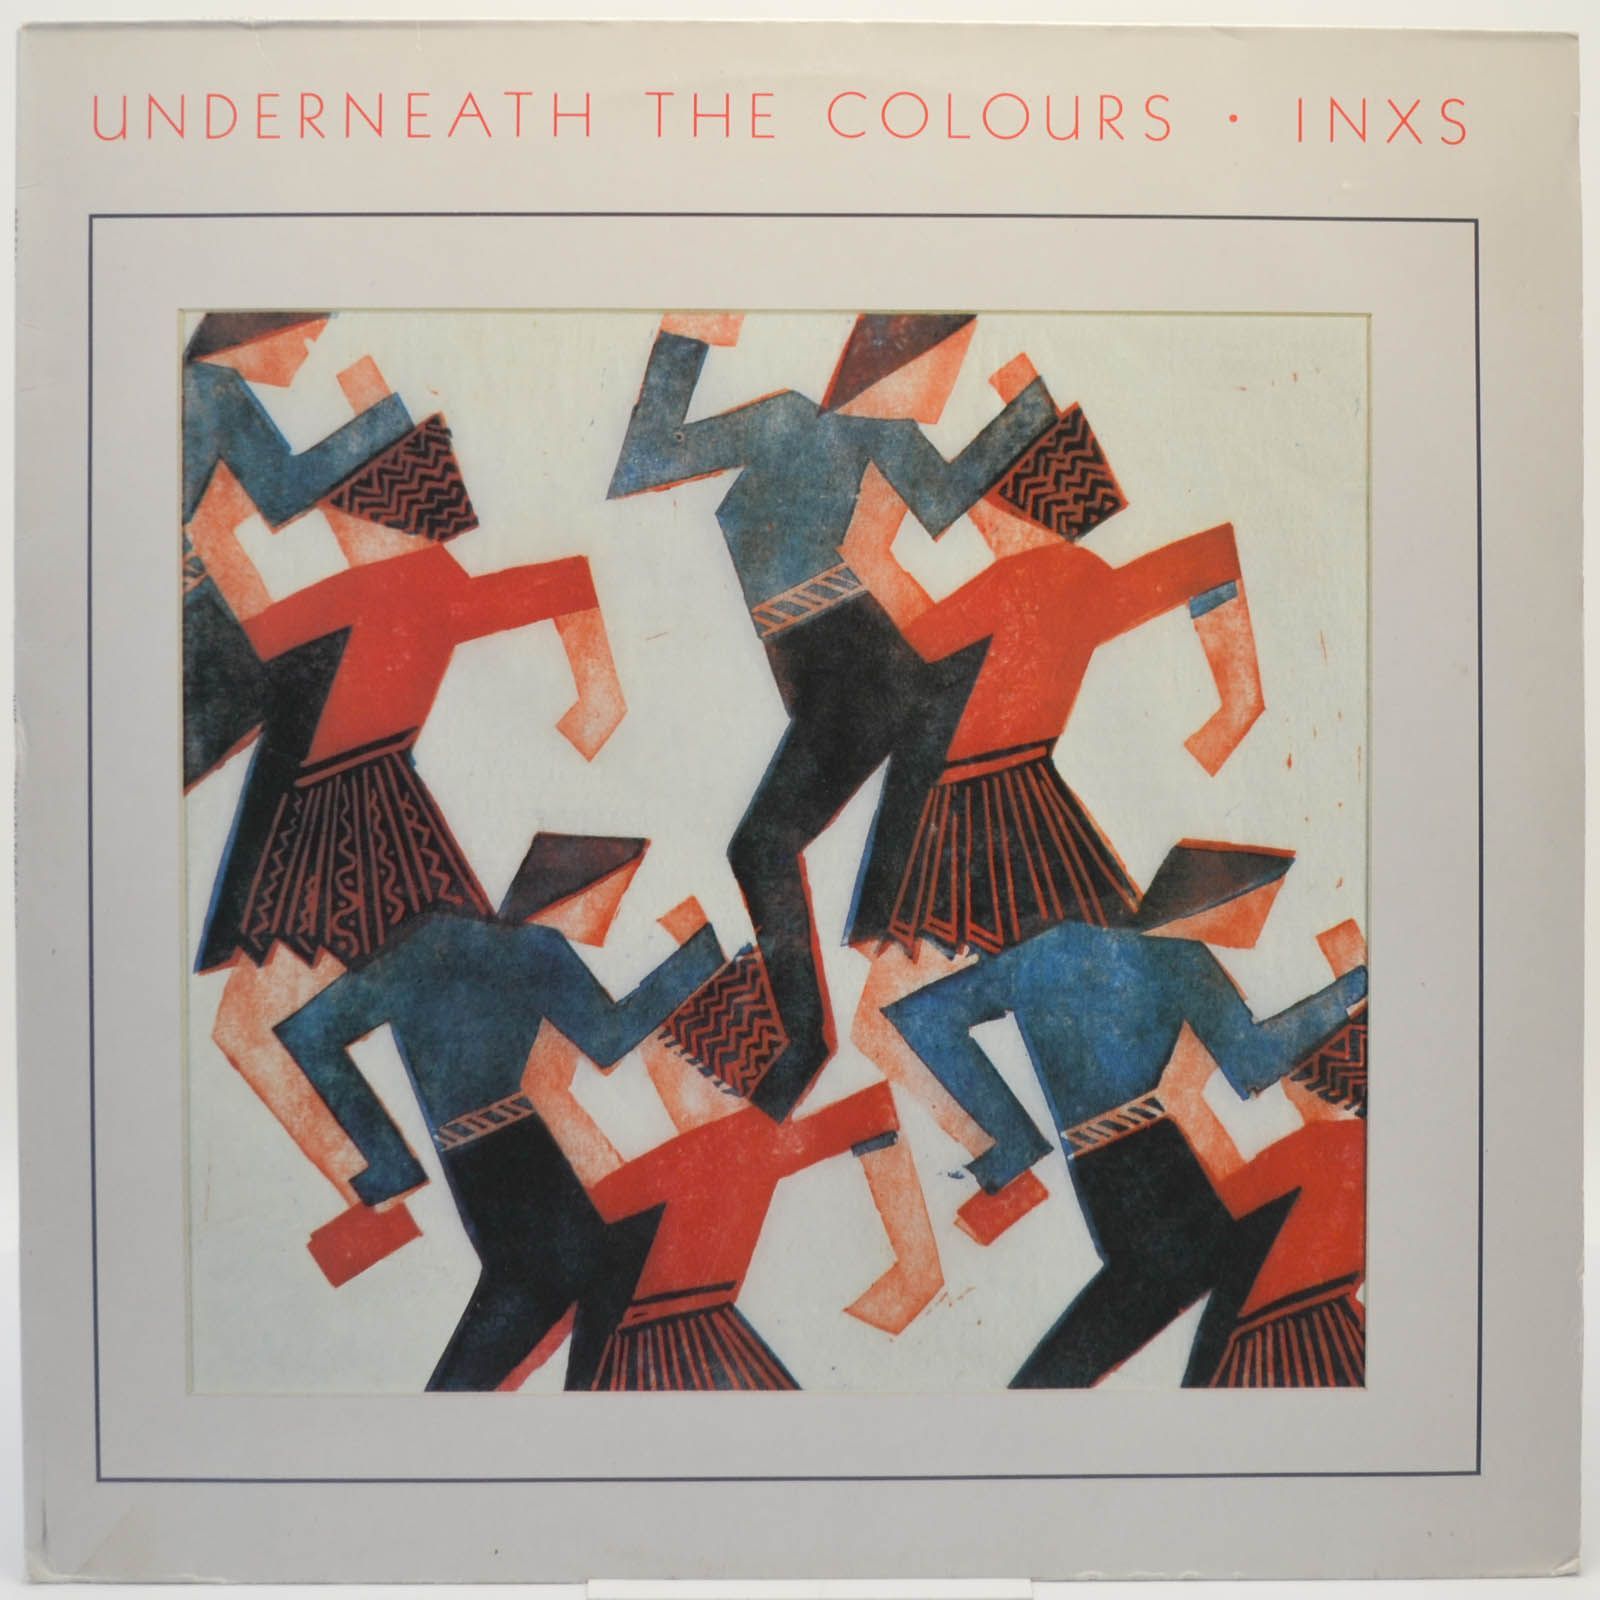 INXS — Underneath The Colours, 1981